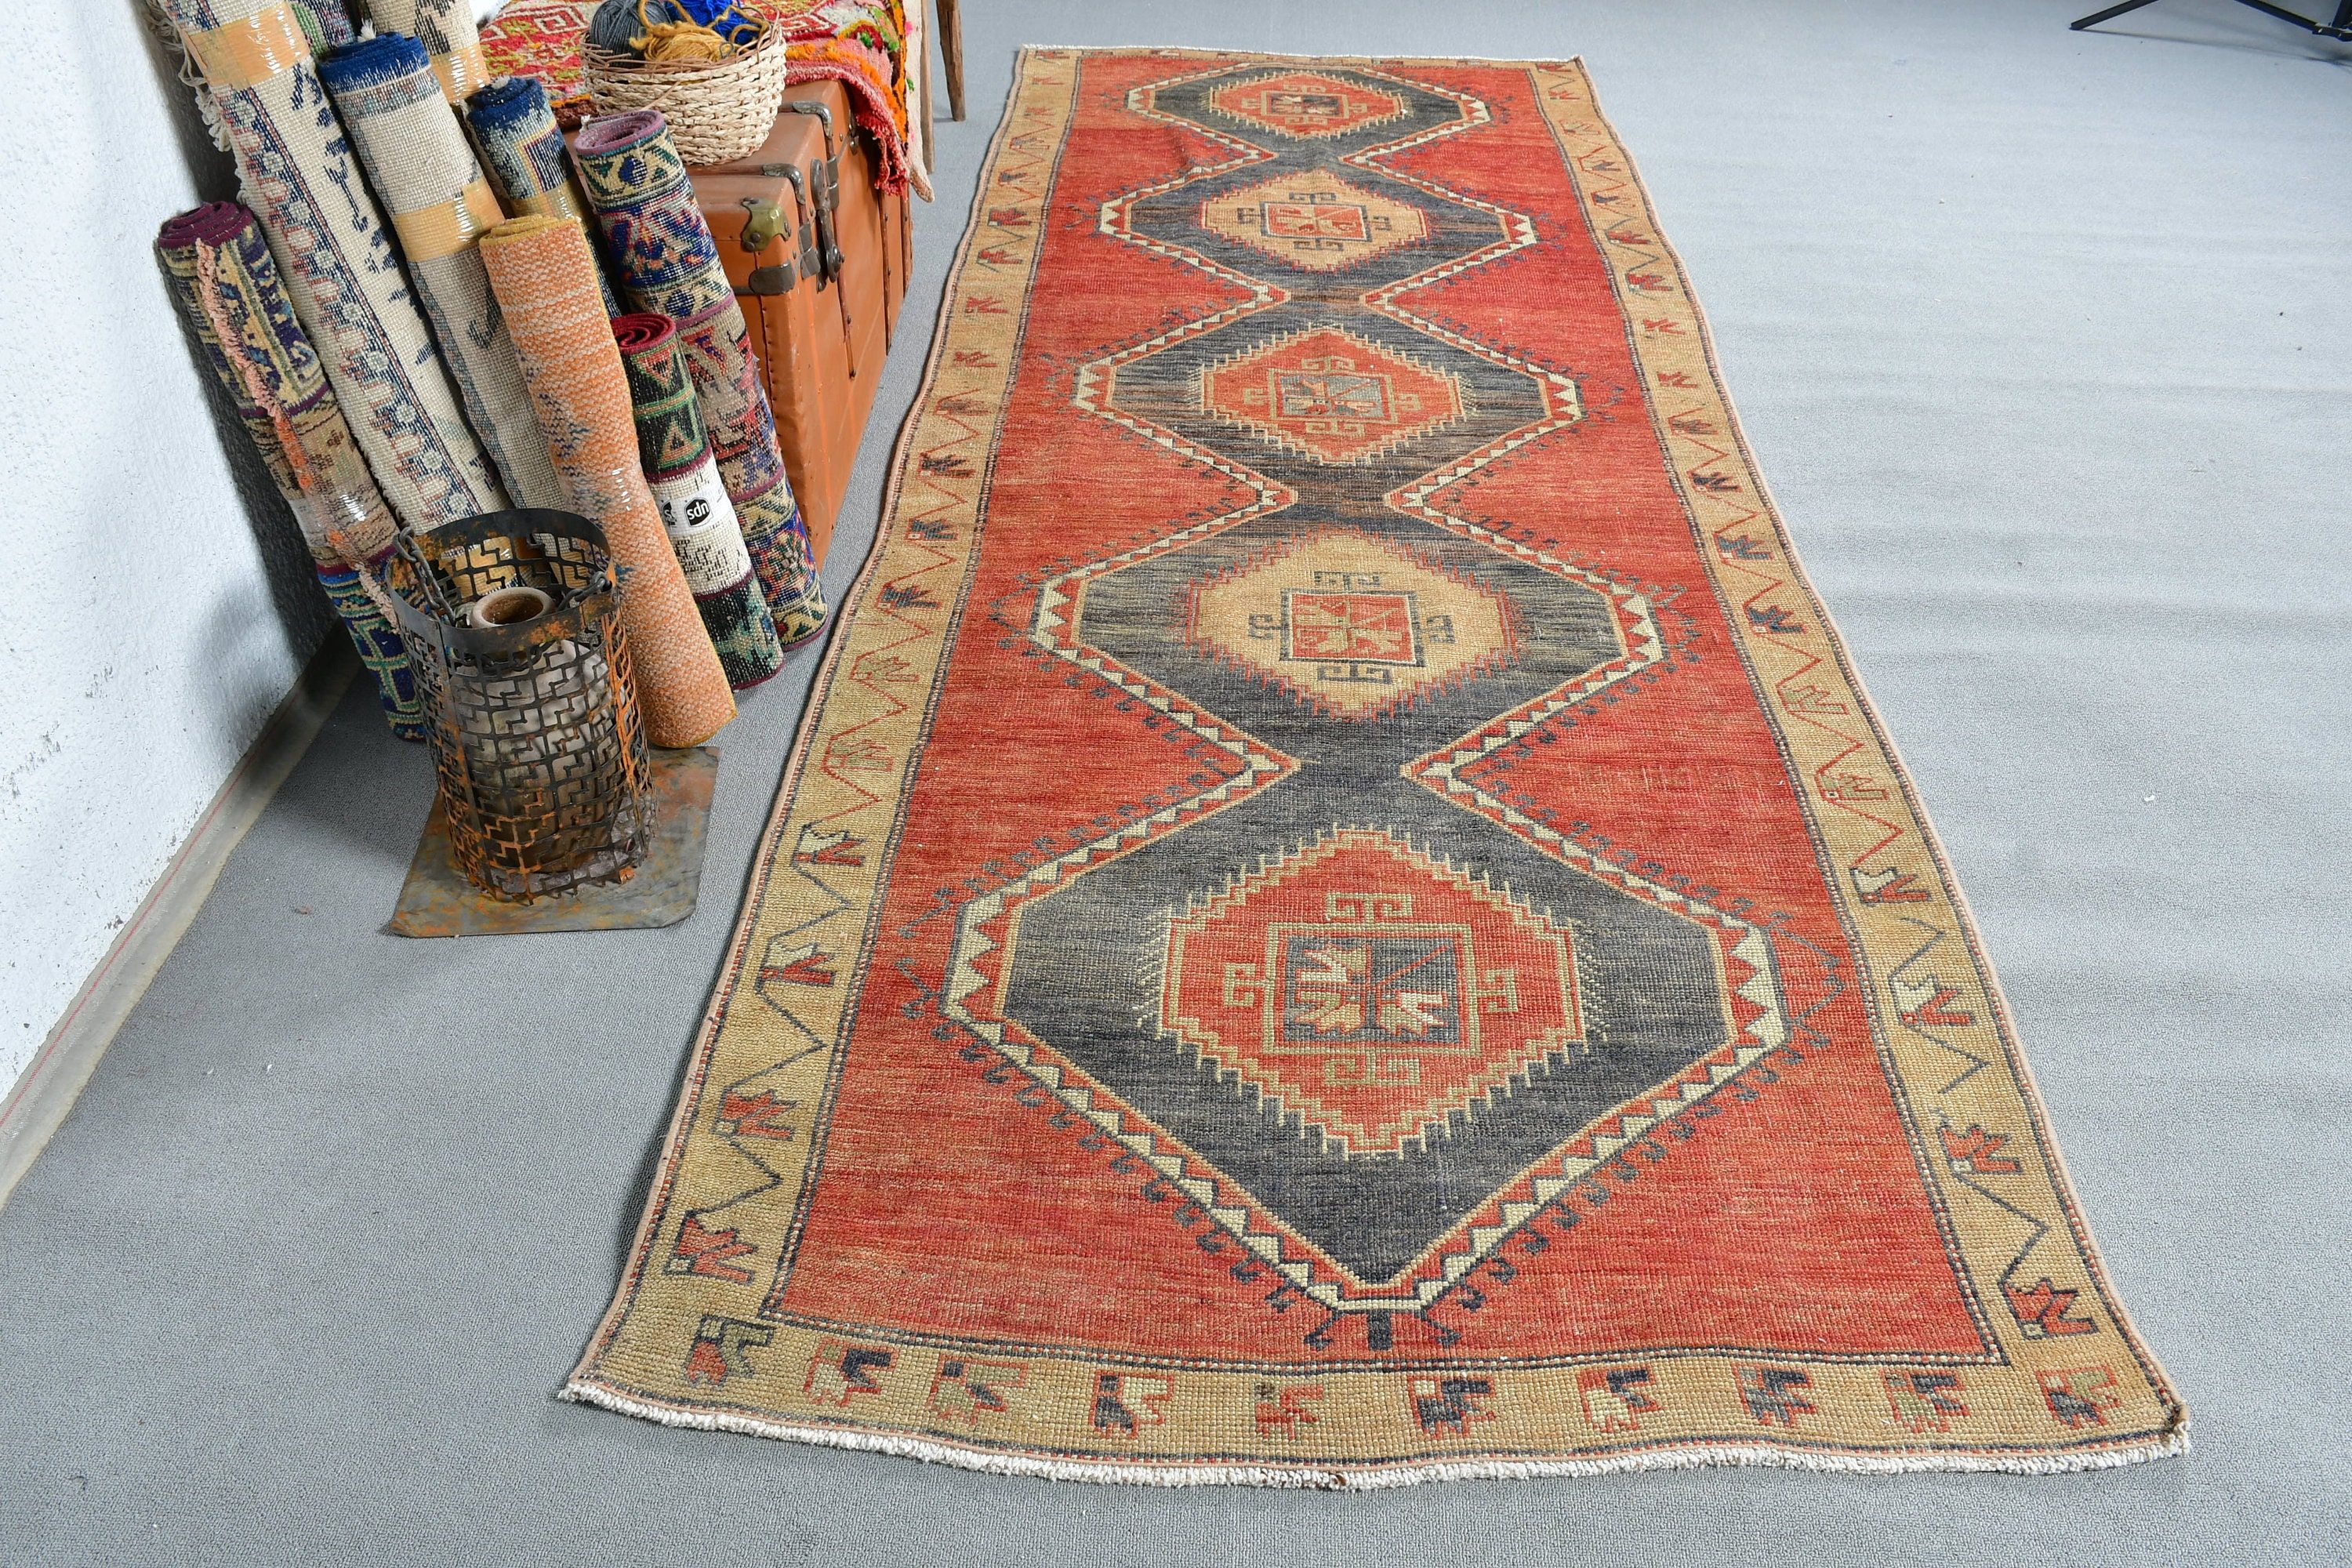 Turkish Rugs, Stair Rugs, Natural Rug, Rugs for Kitchen, 3.9x11.2 ft Runner Rugs, Vintage Rugs, Red Oushak Rug, Home Decor Rug, Oushak Rugs